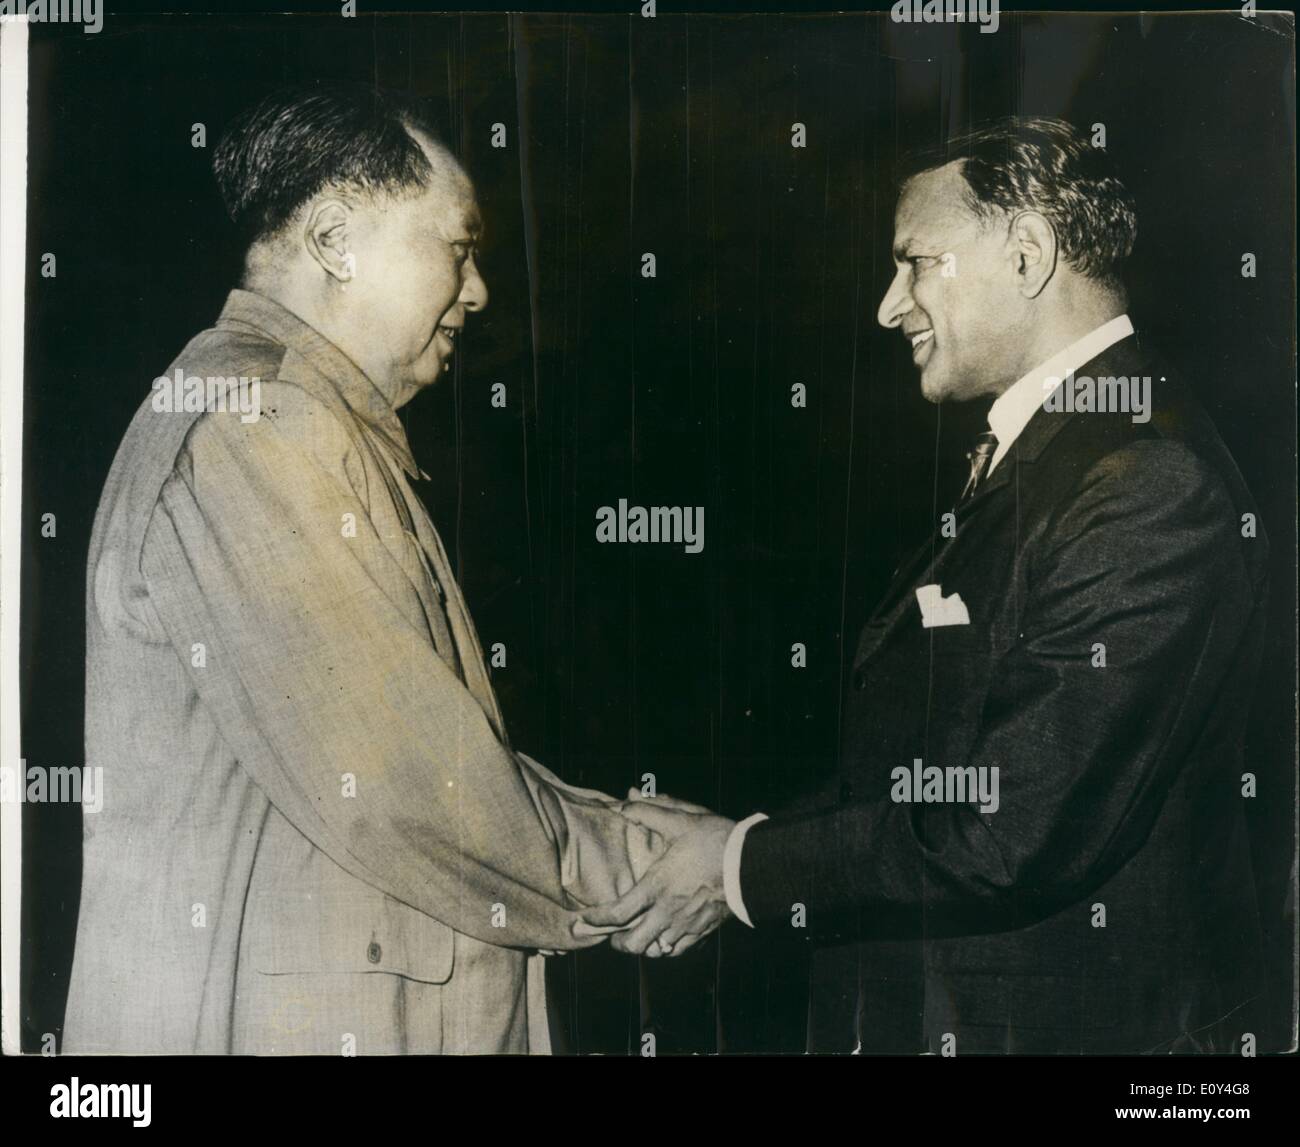 Aug. 08, 1968 - Chairman Mao receives Pakistan Foreign Minister: Chinese leader Chairman Mao is seen cordially greeting the Pakistan Foreign Minister Arshad Hussain. Stock Photo